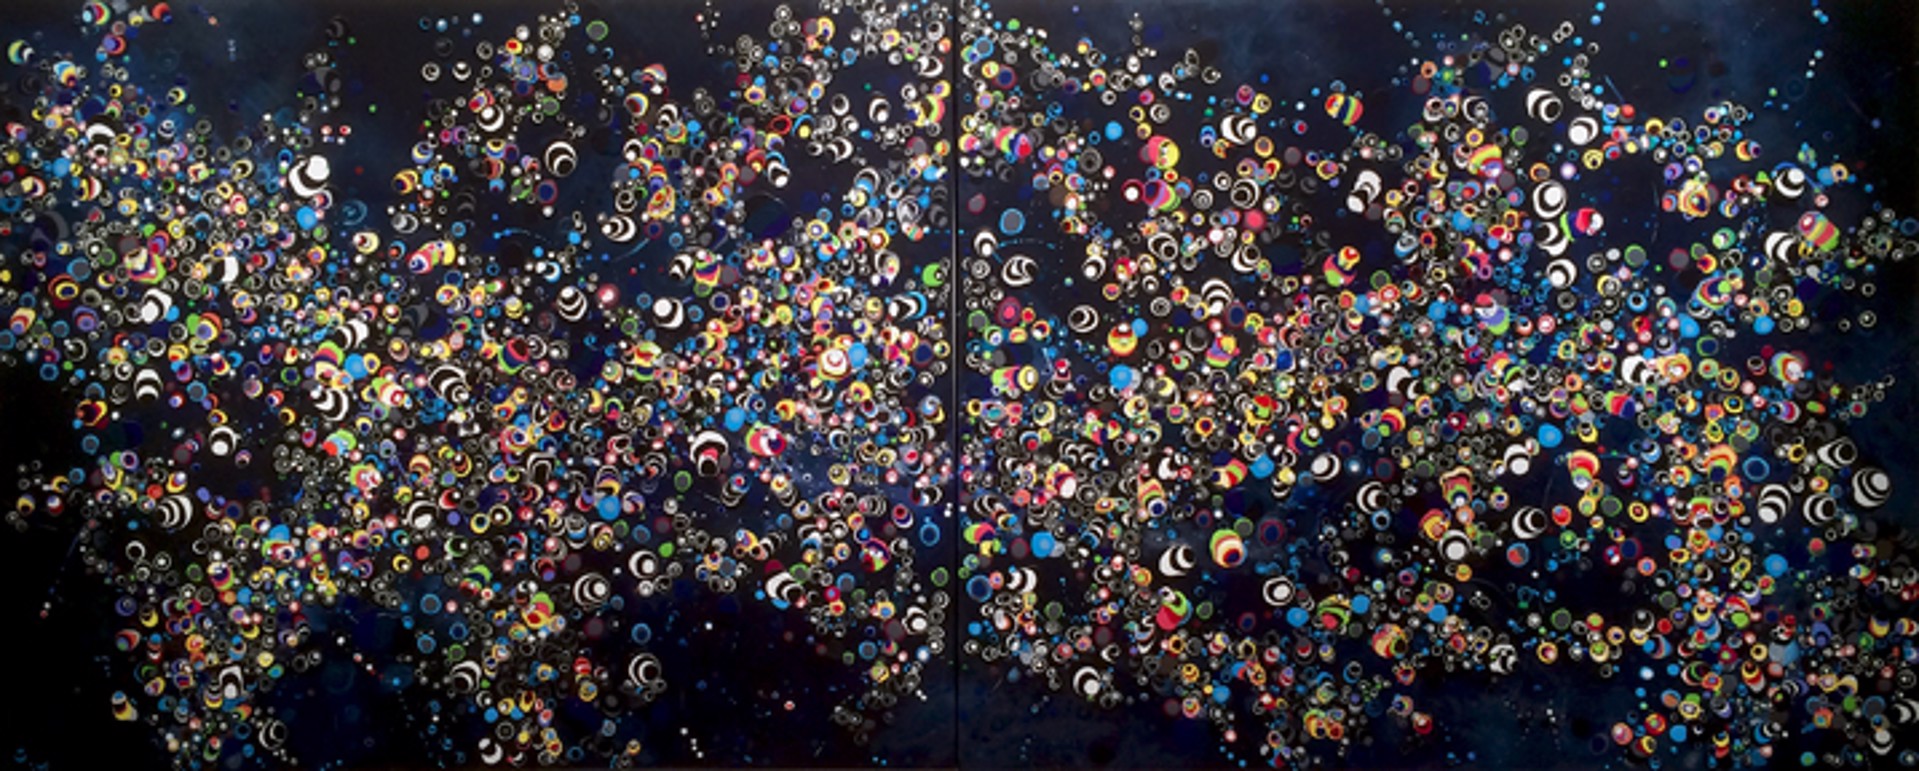 Blue Bliss I & II (diptych) by Charlotte Smith